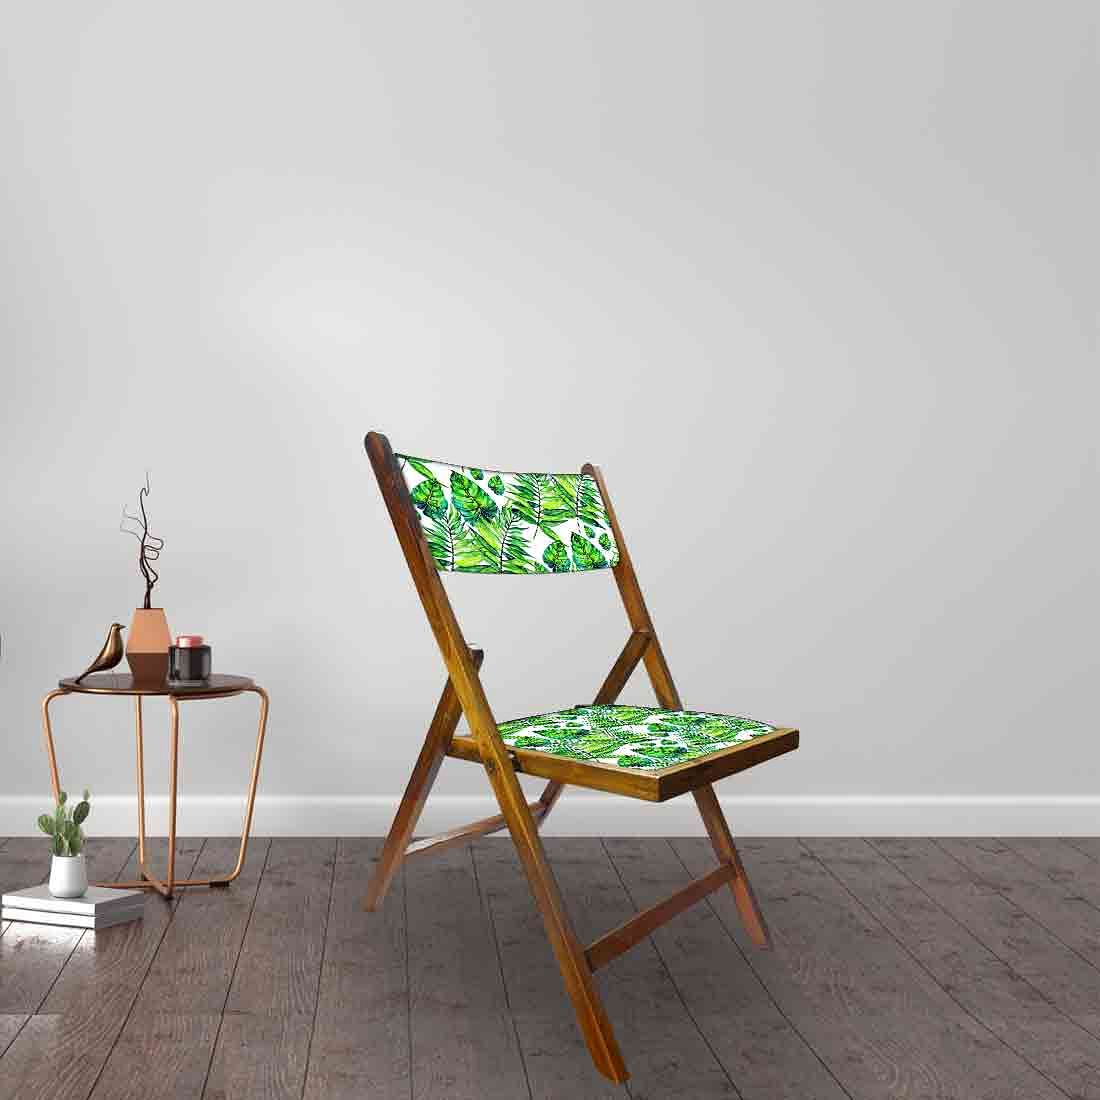 Nutcase Wooden Chairs For Balcony Patio - Light Green Leaves Nutcase